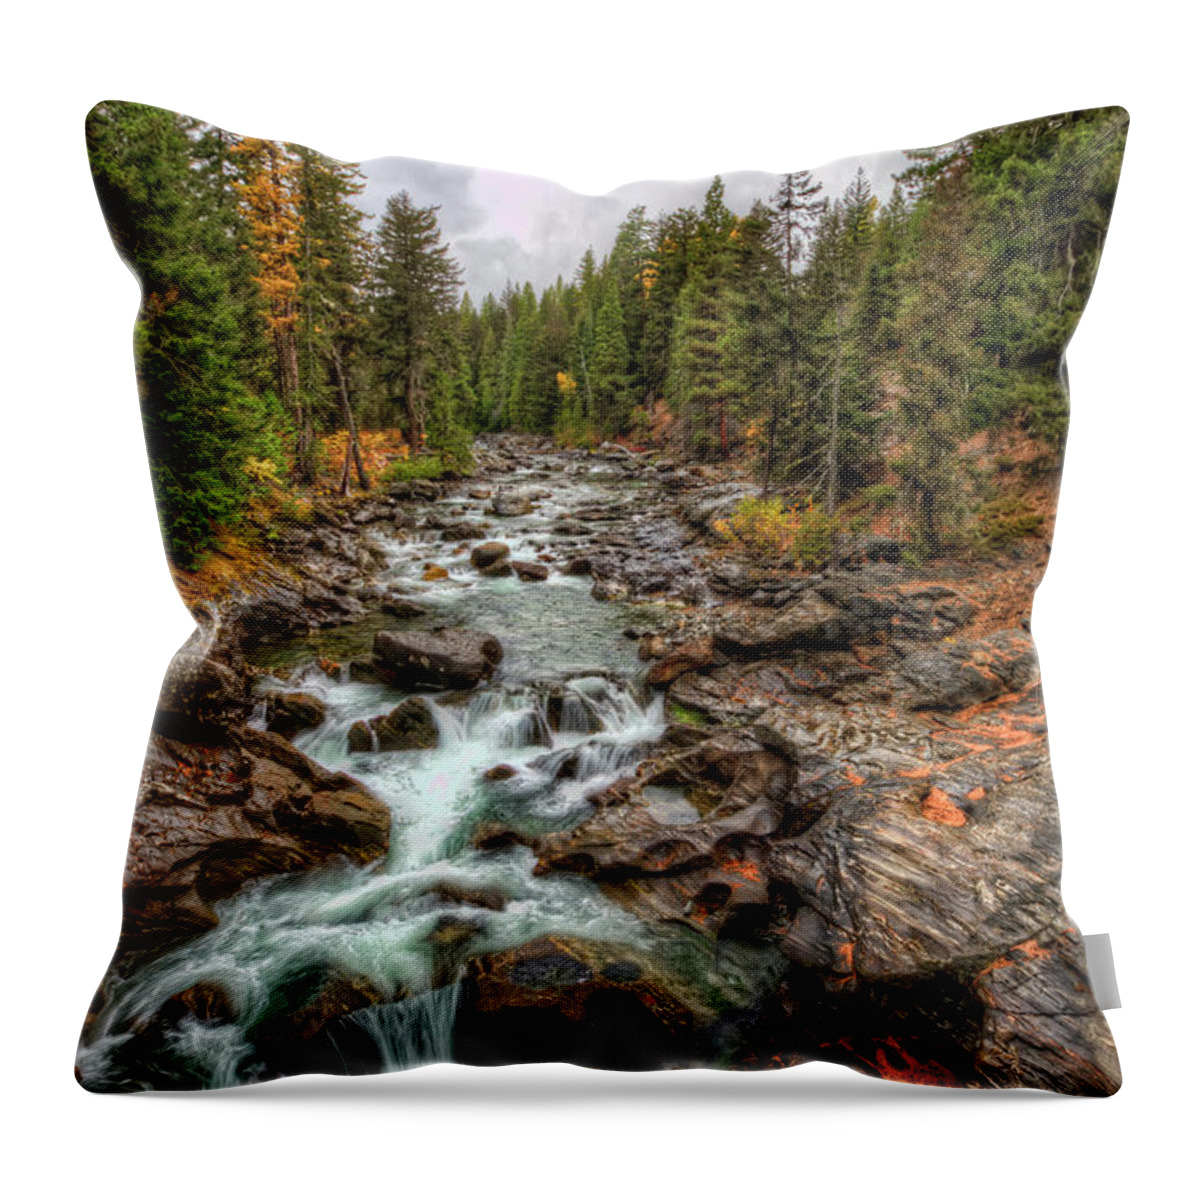 Hdr Throw Pillow featuring the photograph Icicle Gorge 2 by Brad Granger